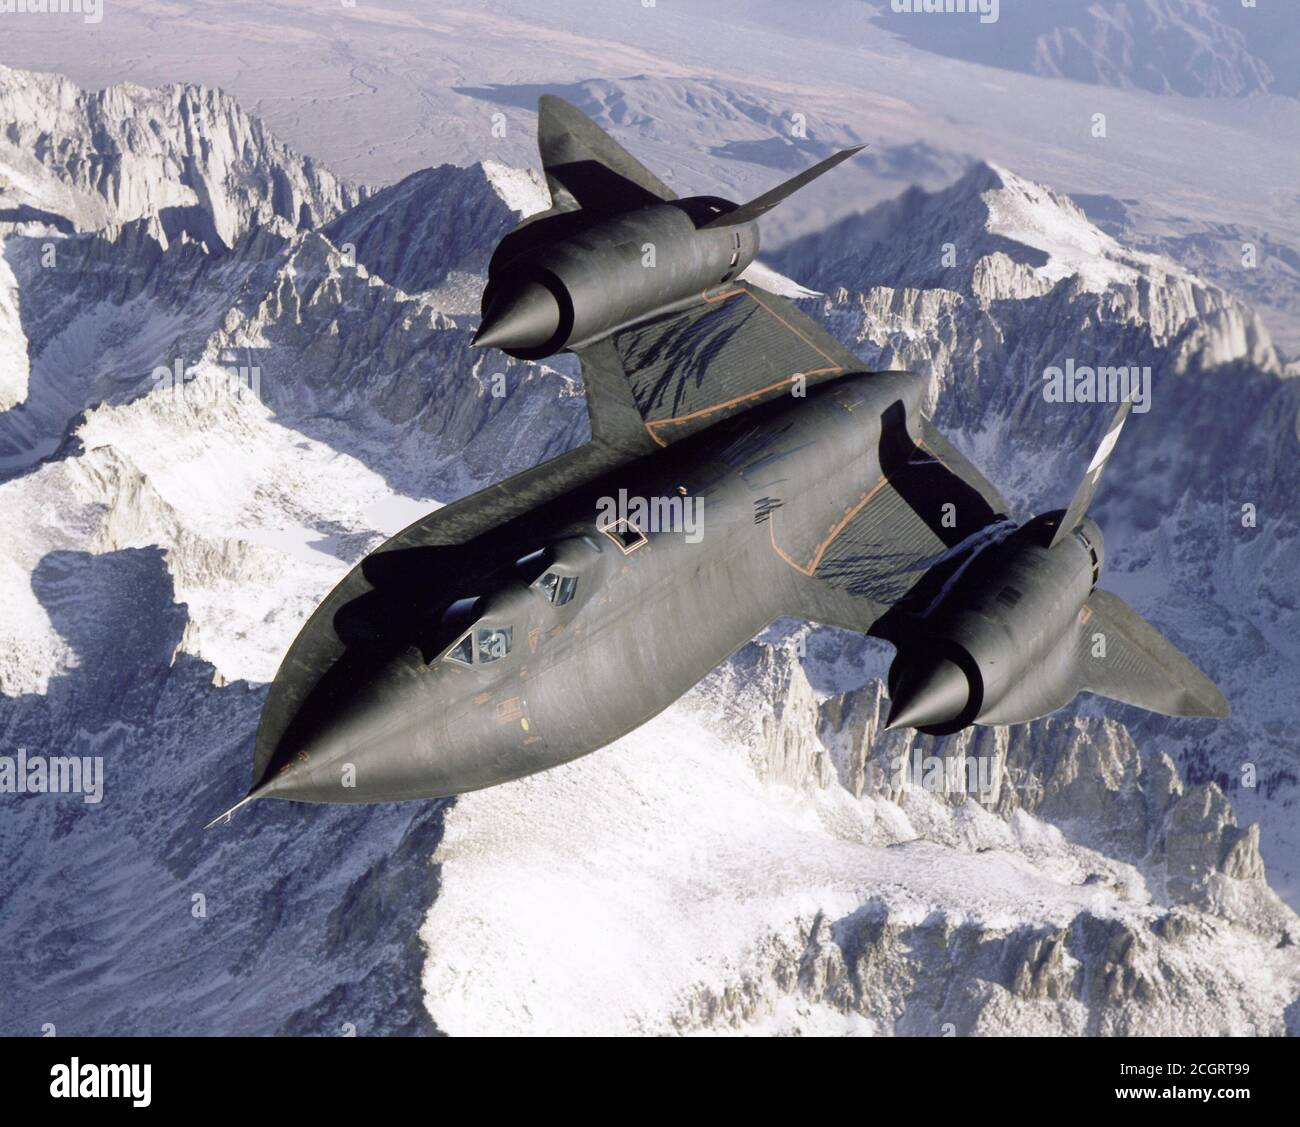 Dryden's SR-71B, NASA 831, slices across the snowy southern Sierra Nevada Mountains of California after being refueled by an Air Force Flight Test Center tanker during a recent flight. The Mach 3 aircraft are being flown by the Dryden Flight Research Center, Edwards, California as testbeds for high-speed, high-altitude aeronautical research. Capable of flying more than 2200 mph and at altitudes of over 85,000 feet, they are excellent platforms for research and experiments in aerodynamics, propulsion, structures, thermal protection materials, atmospheric studies, and sonic boom characterization Stock Photo